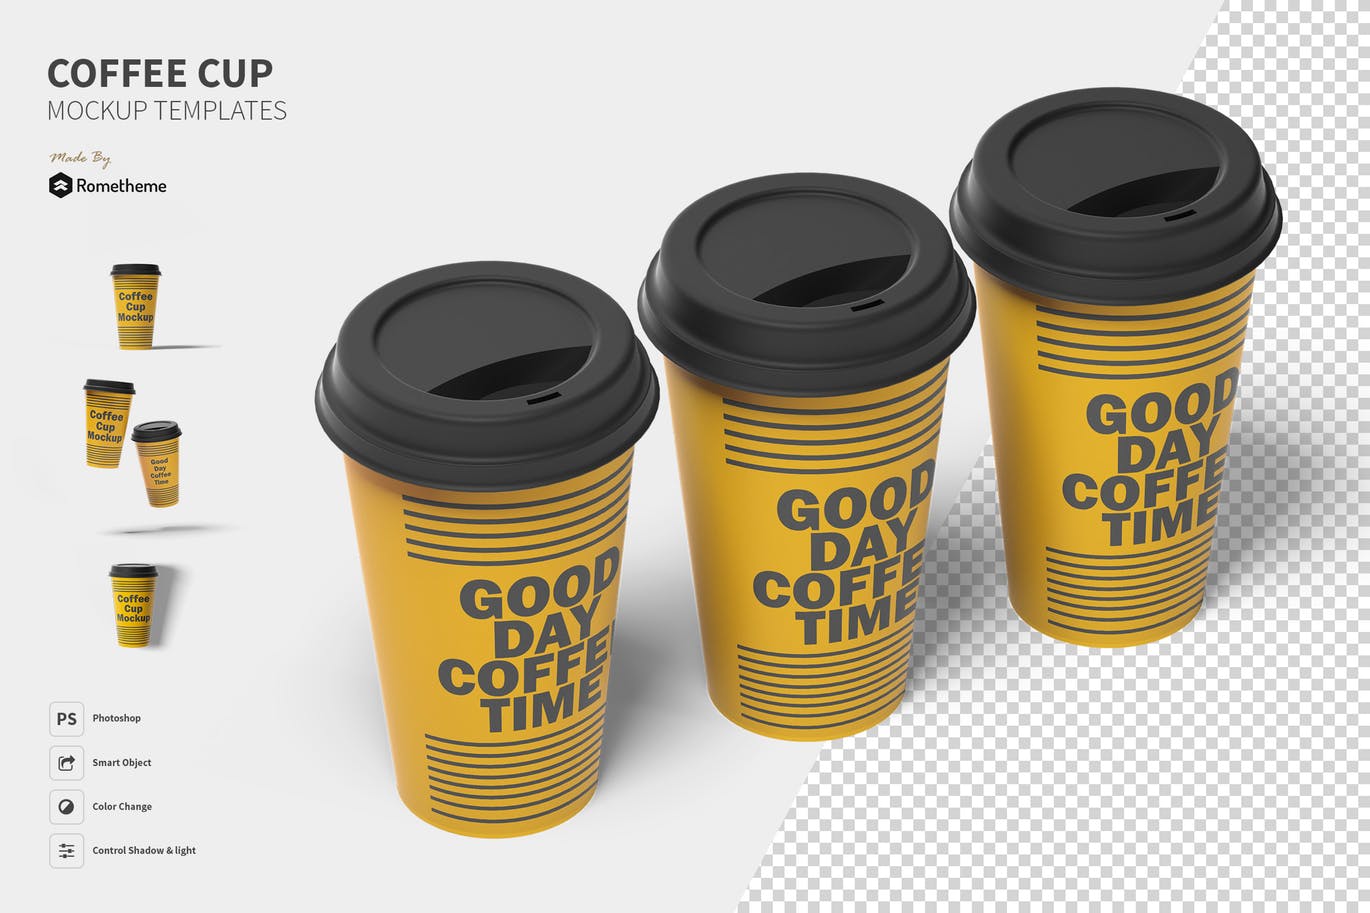 A set of coffee cup mockups